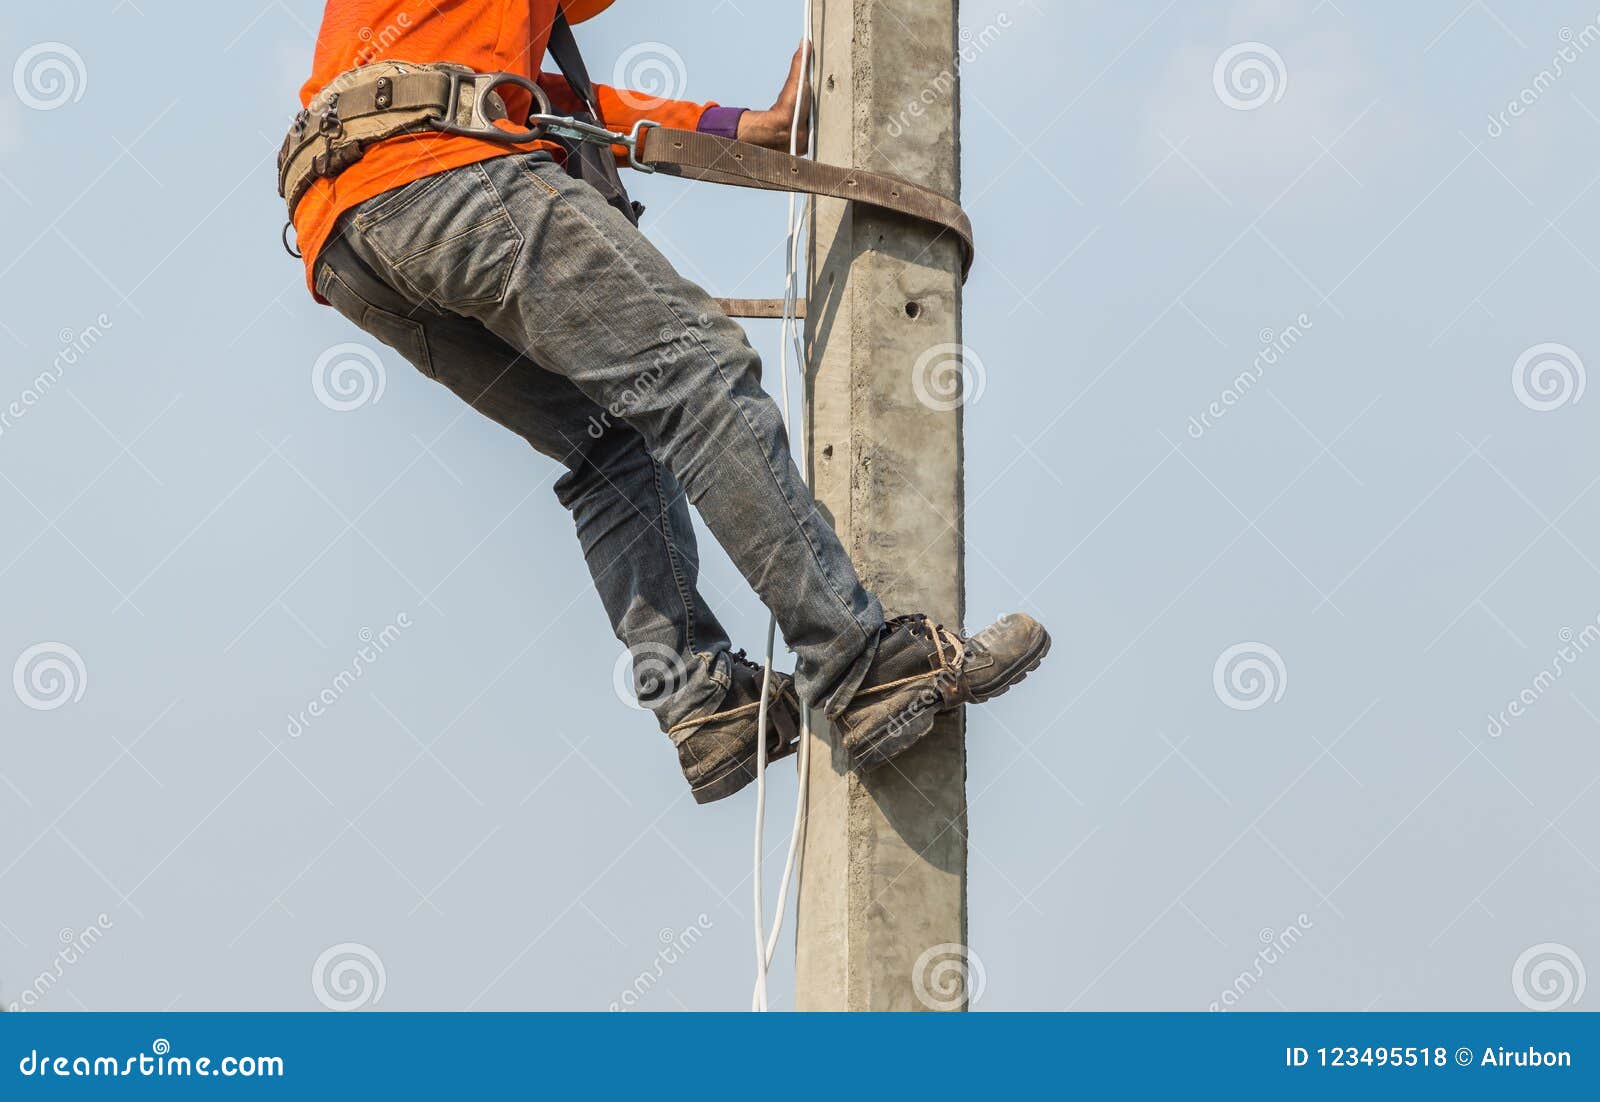 Electrician Climb Working with Safety Belt Stock Photo - Image of  occupation, concrete: 123495518